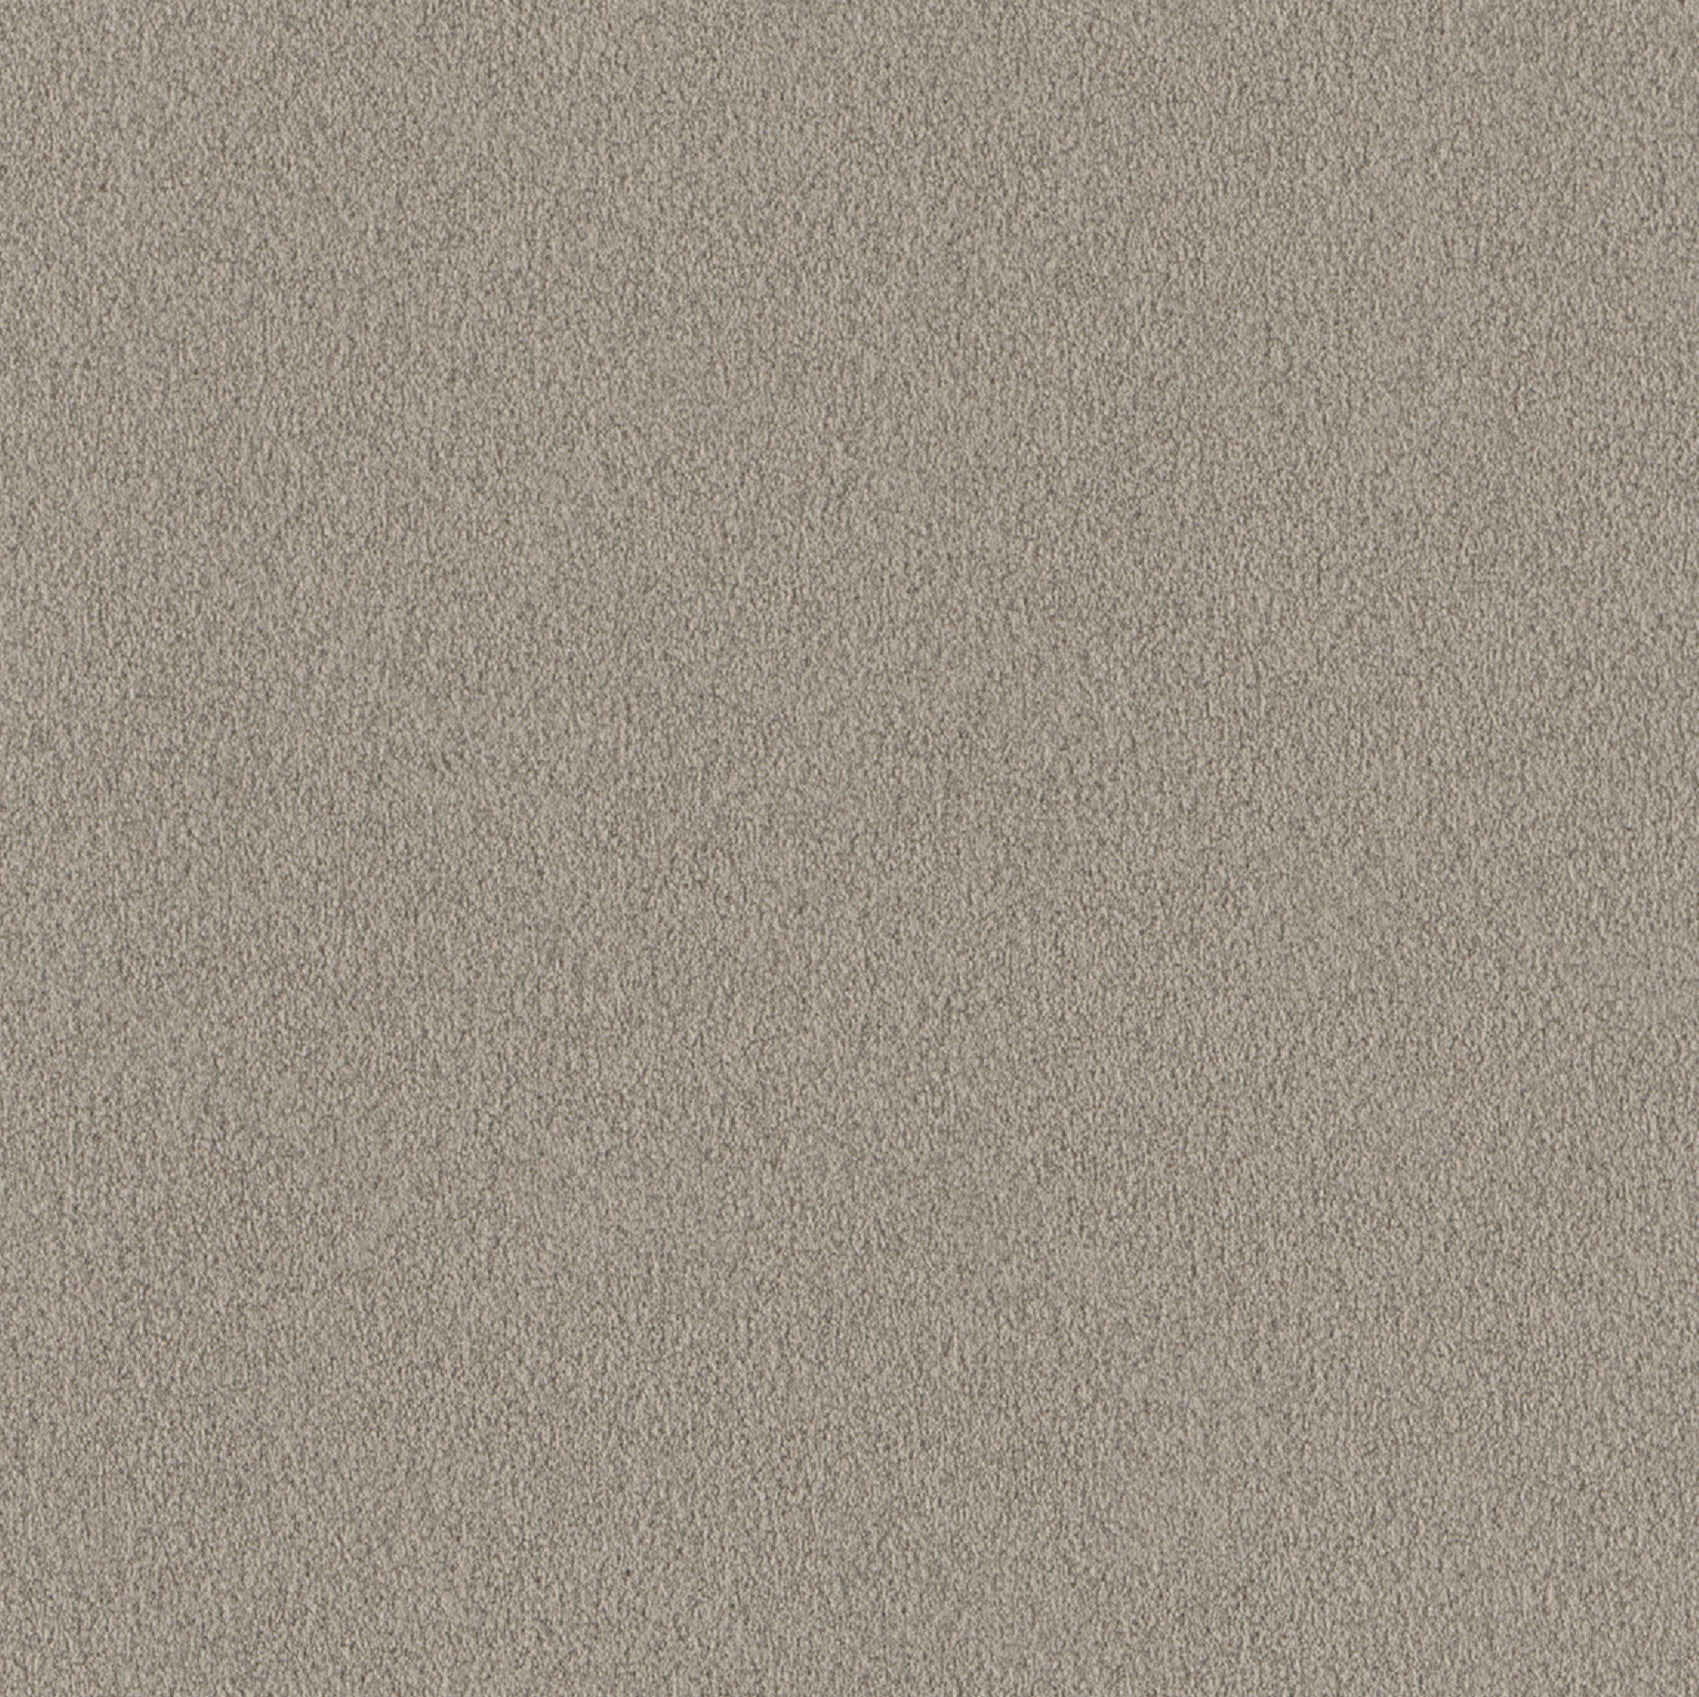 Andriali-Contract-Vinyl_Upholstery-Design-Serenity-Color-020Beaver-Width-140cm